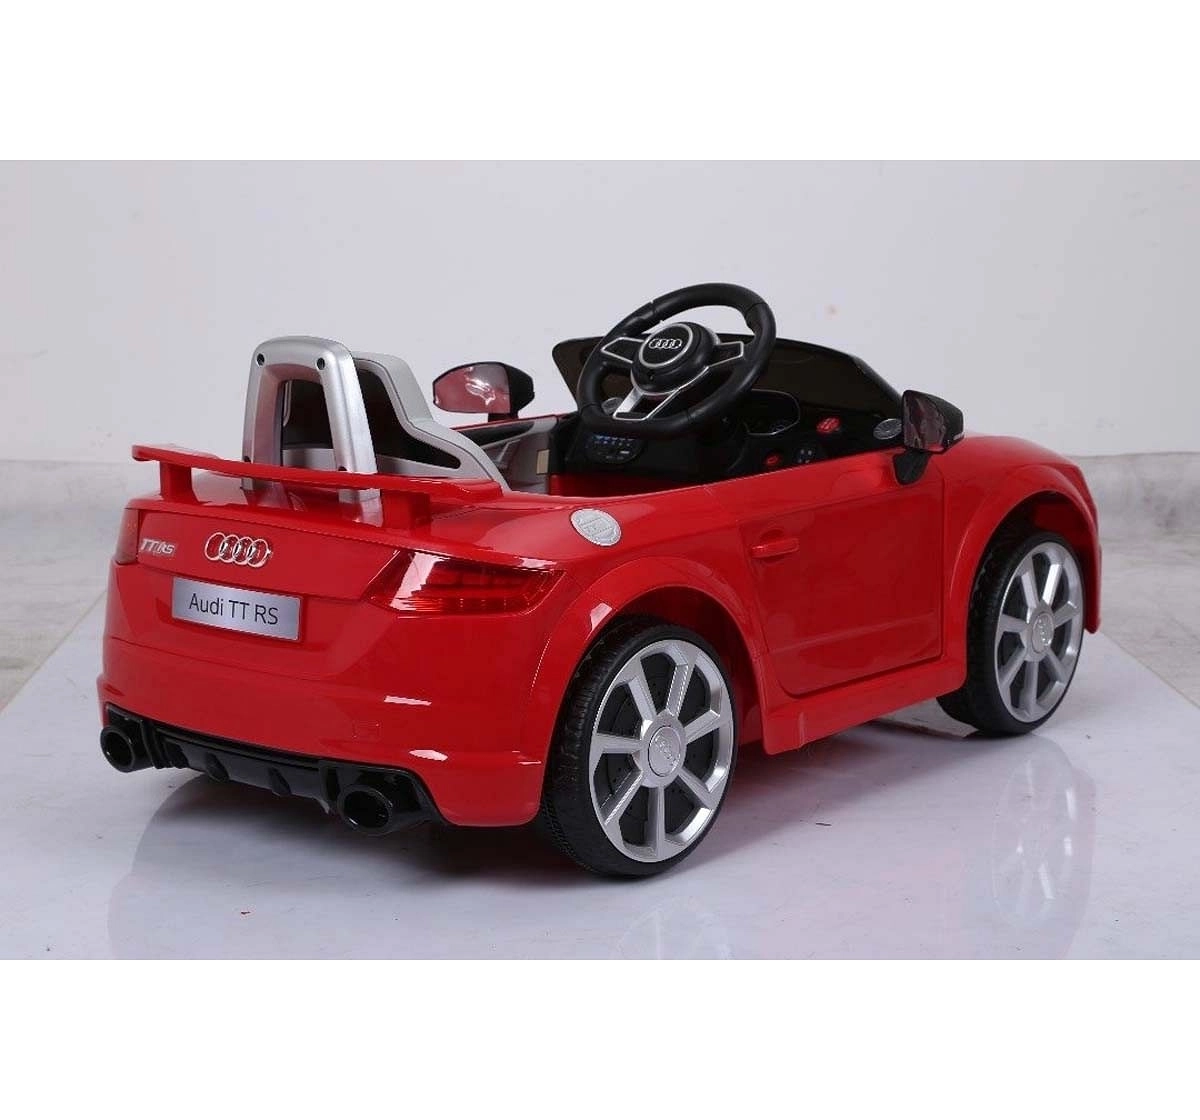 B:Wild Audi Tt Rs Ride-On Battery Operated Car Red Battery Operated Rideons for Kids Age 3Y+ (Red)